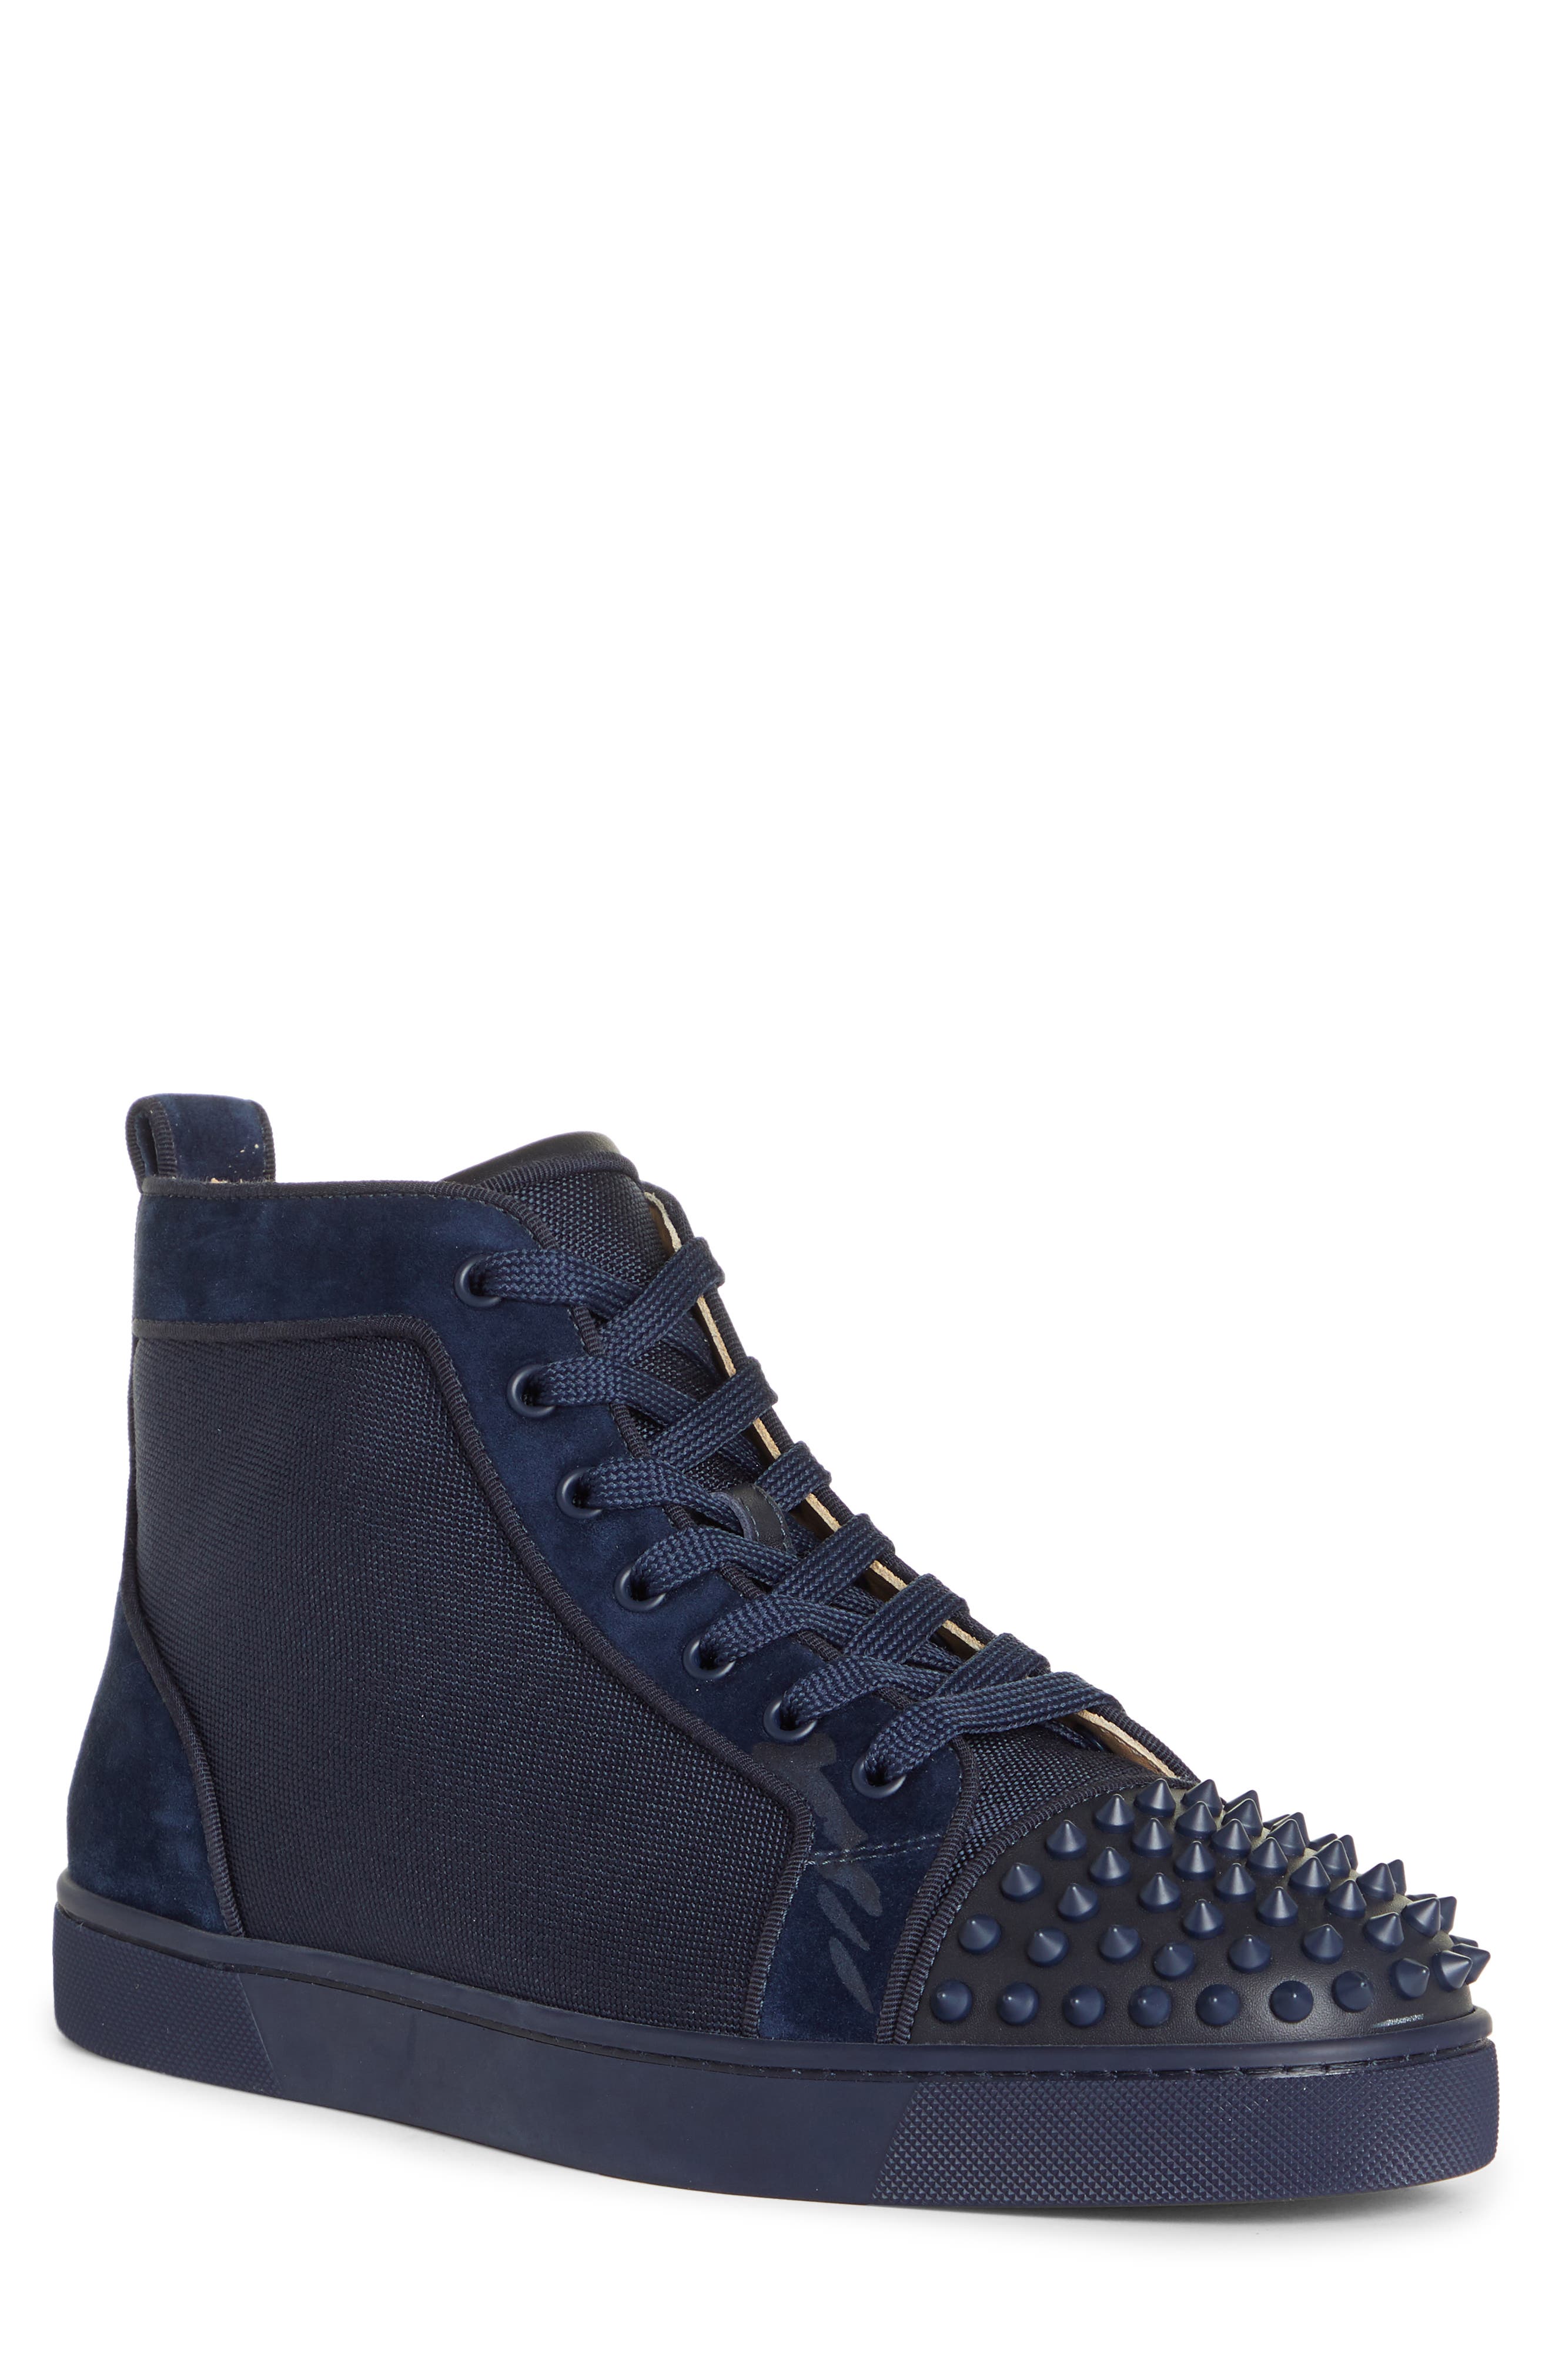 louboutin mens shoes price